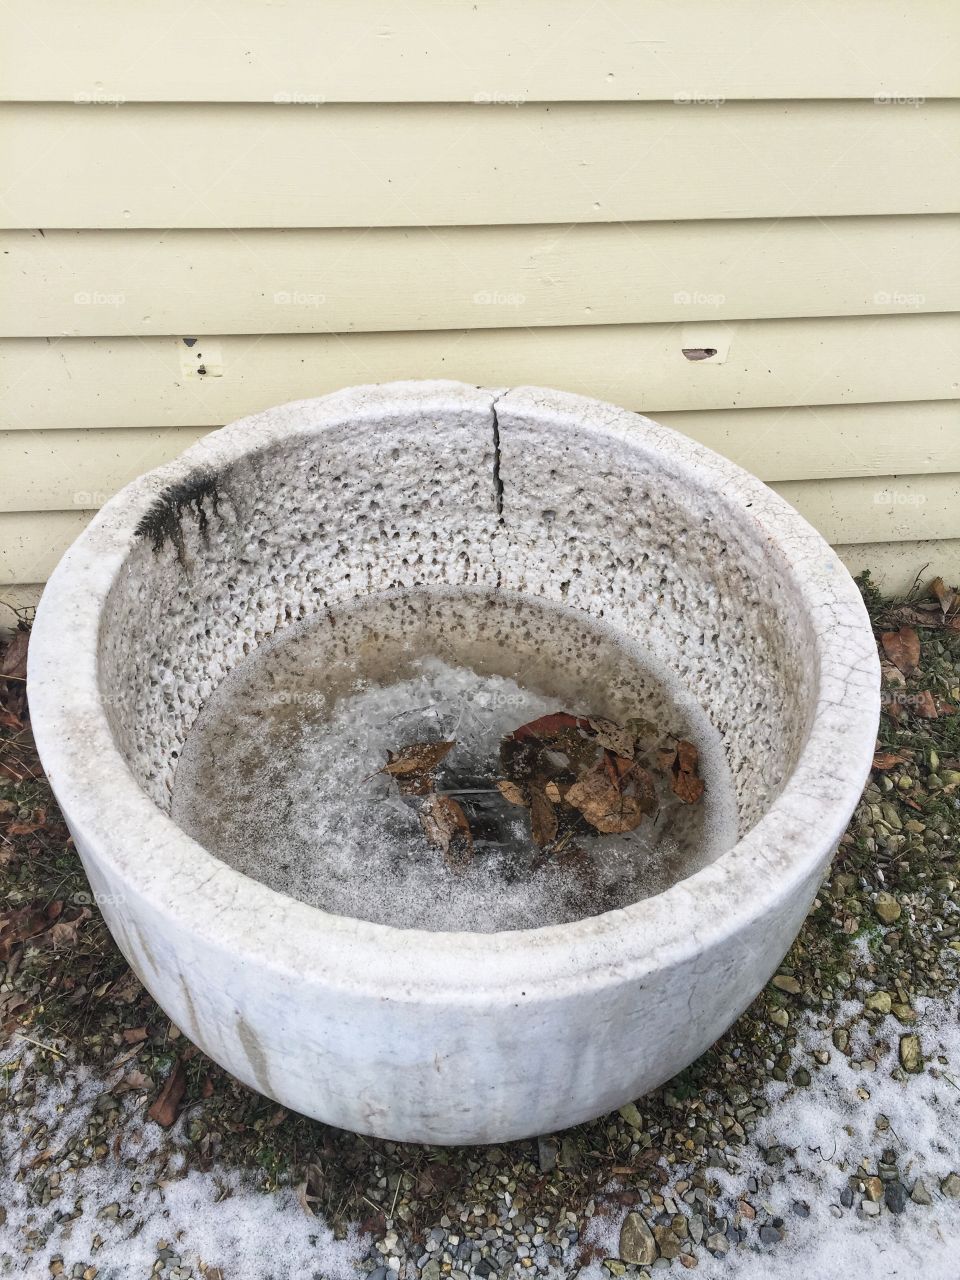 A large, decorative cement bowl partially filled with ice and leaves. It sits by an exterior wall on gravel.